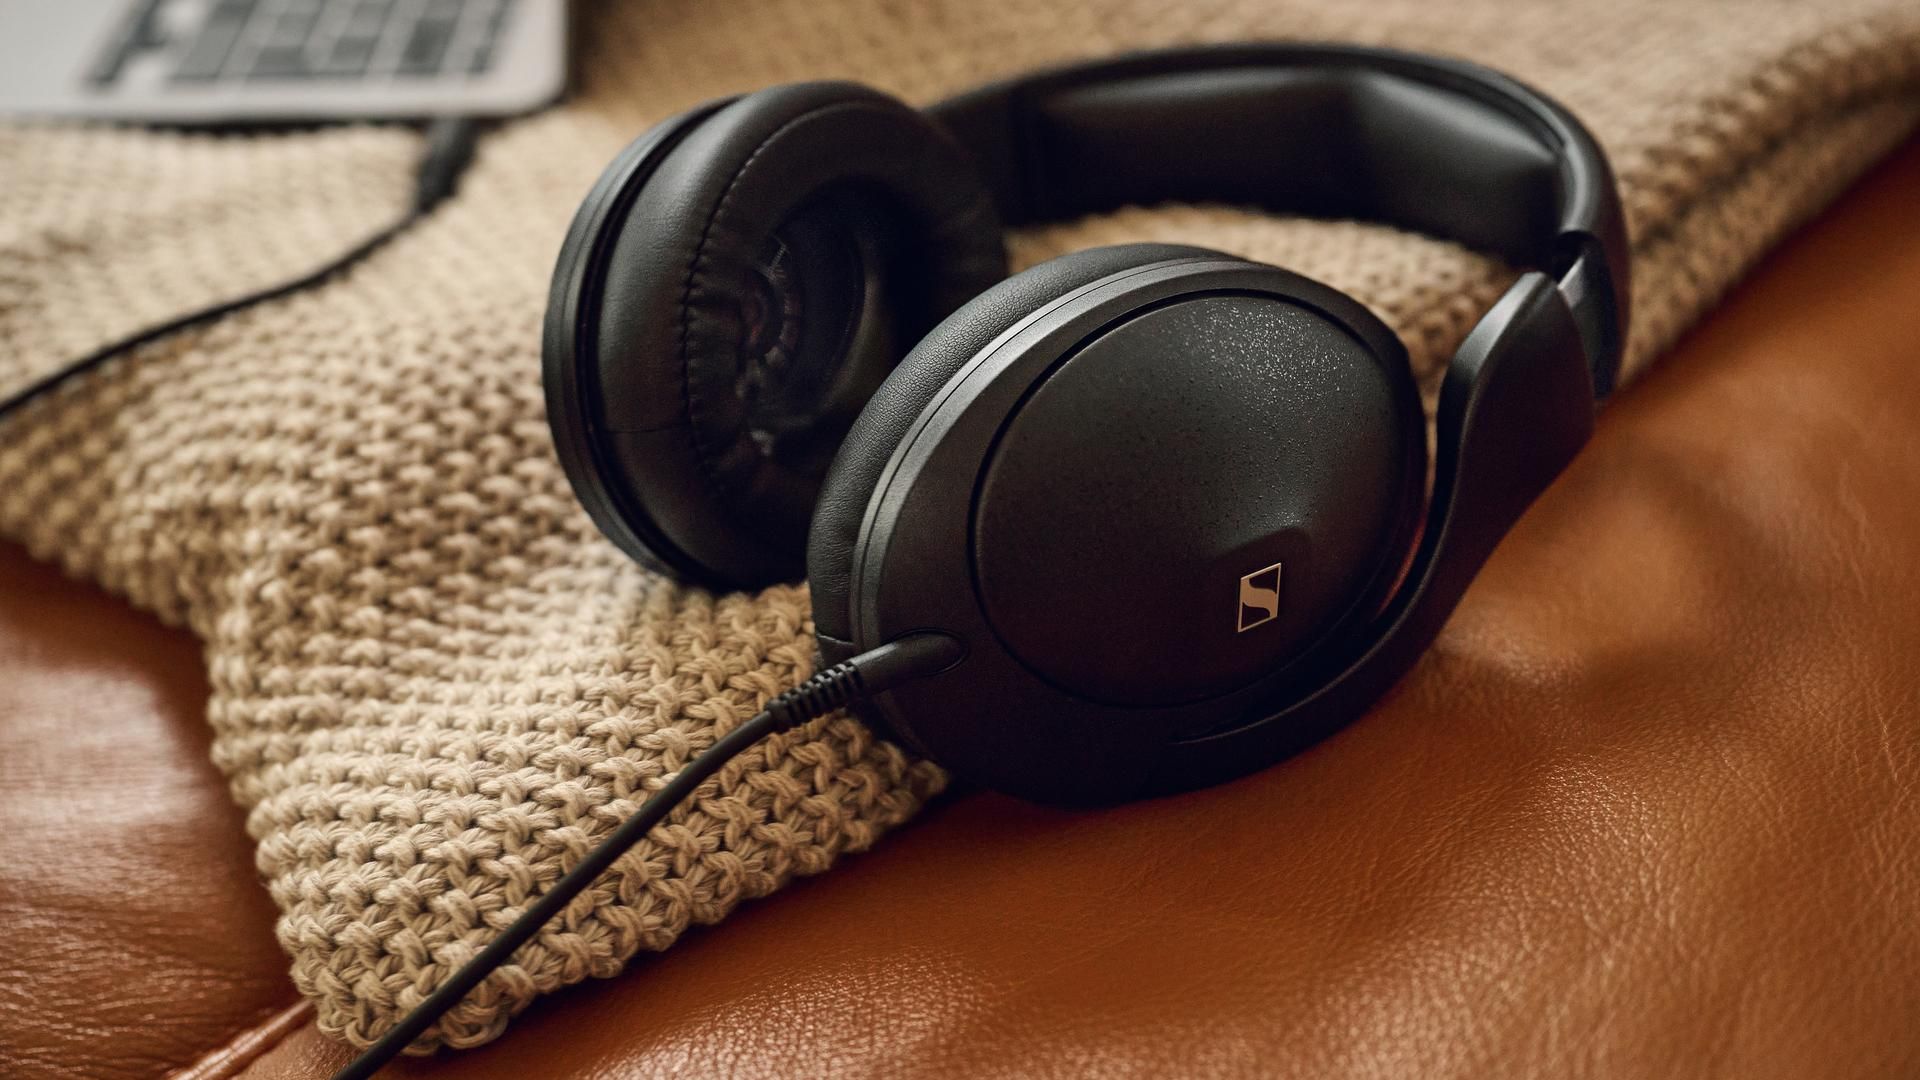 Sennheiser HD 620S on a brown leather couch